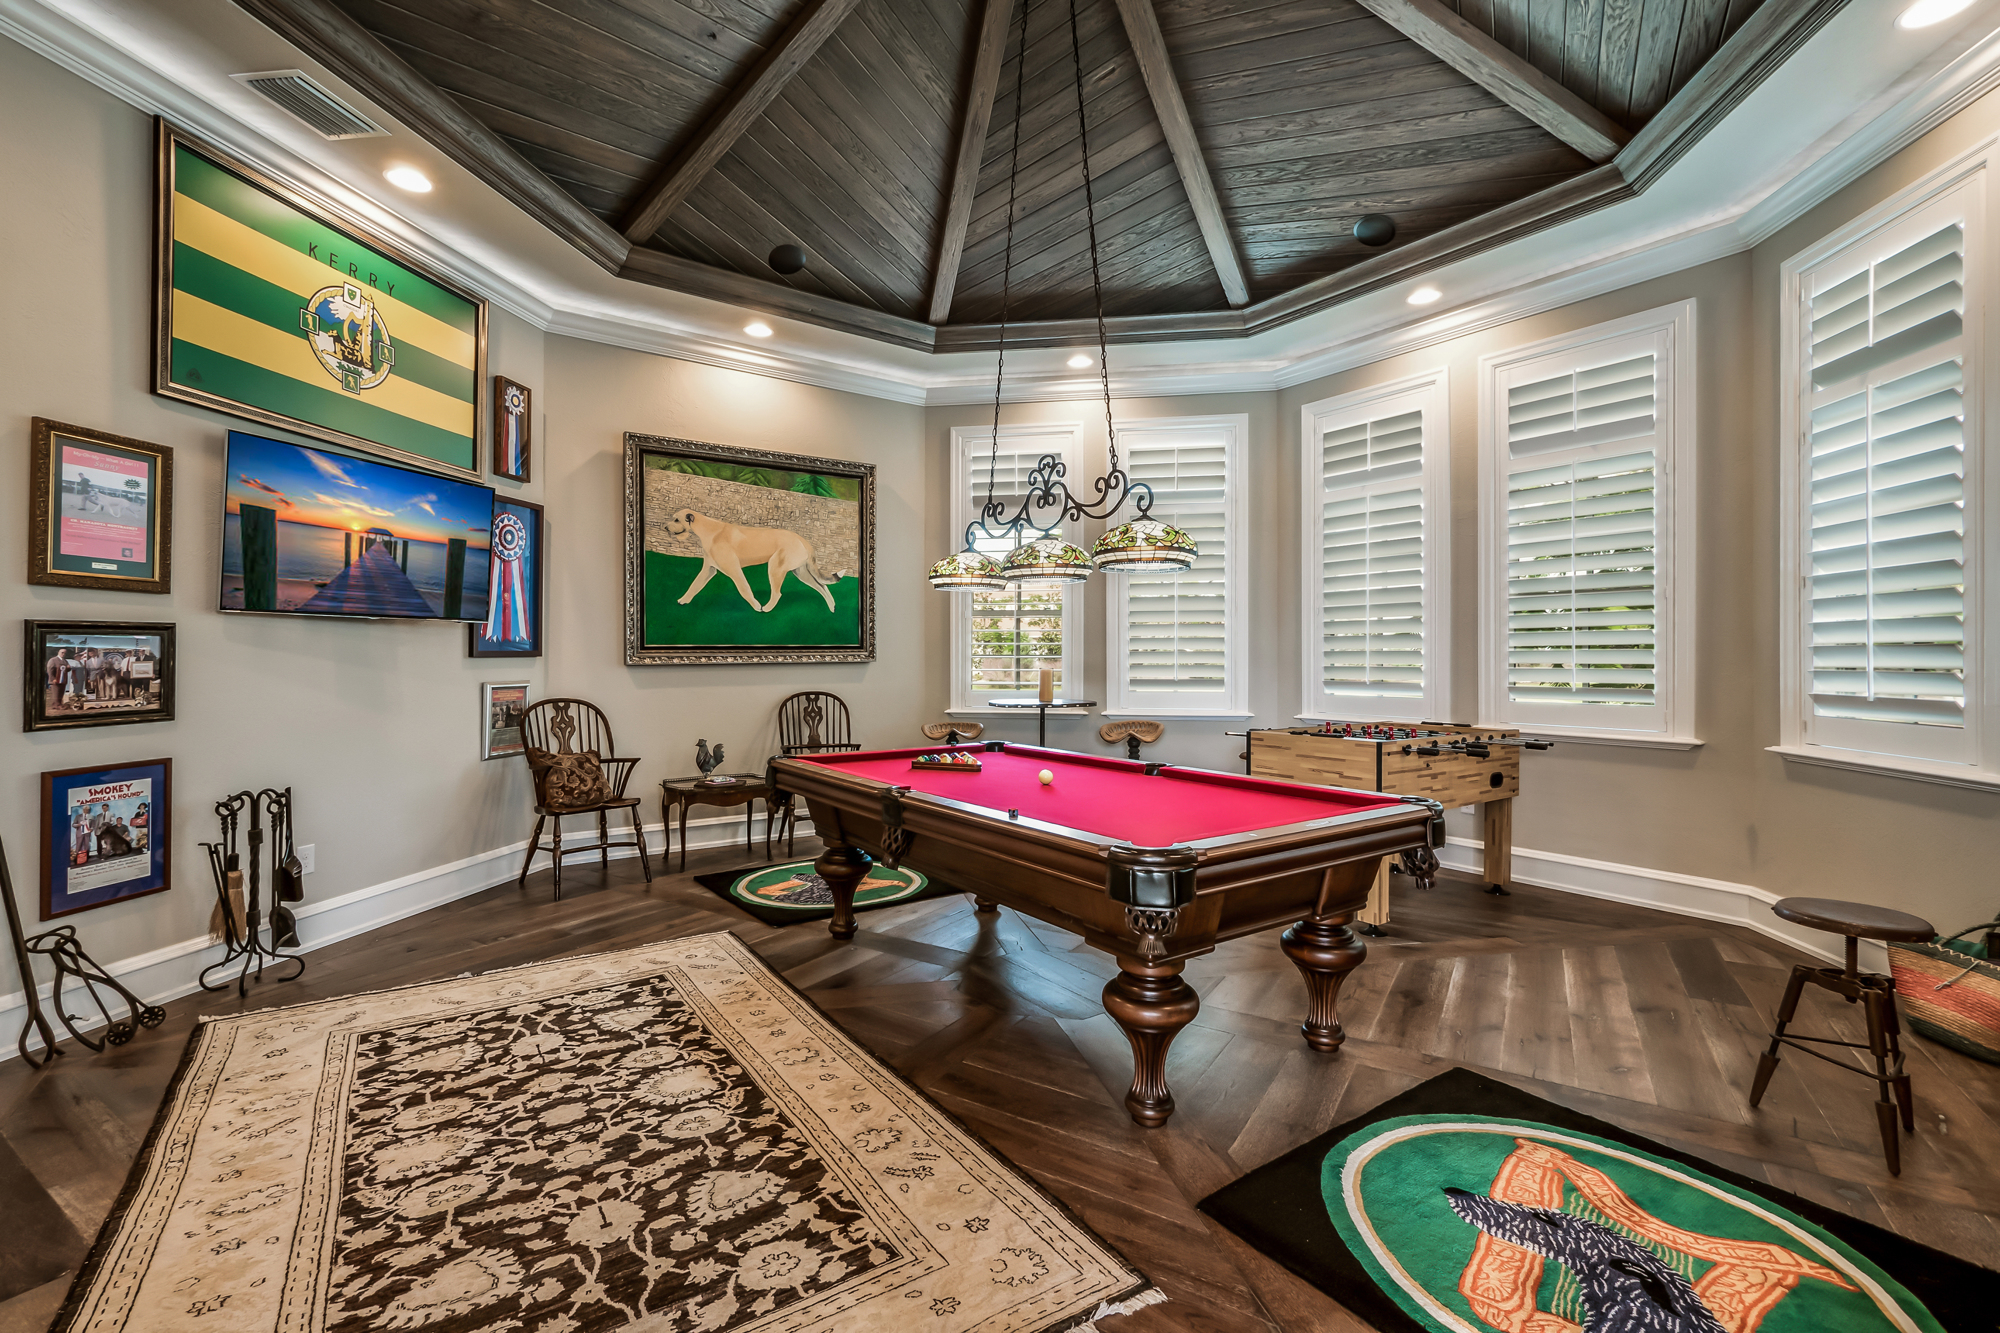 A game room provides entertainment for eight visiting grandkids.